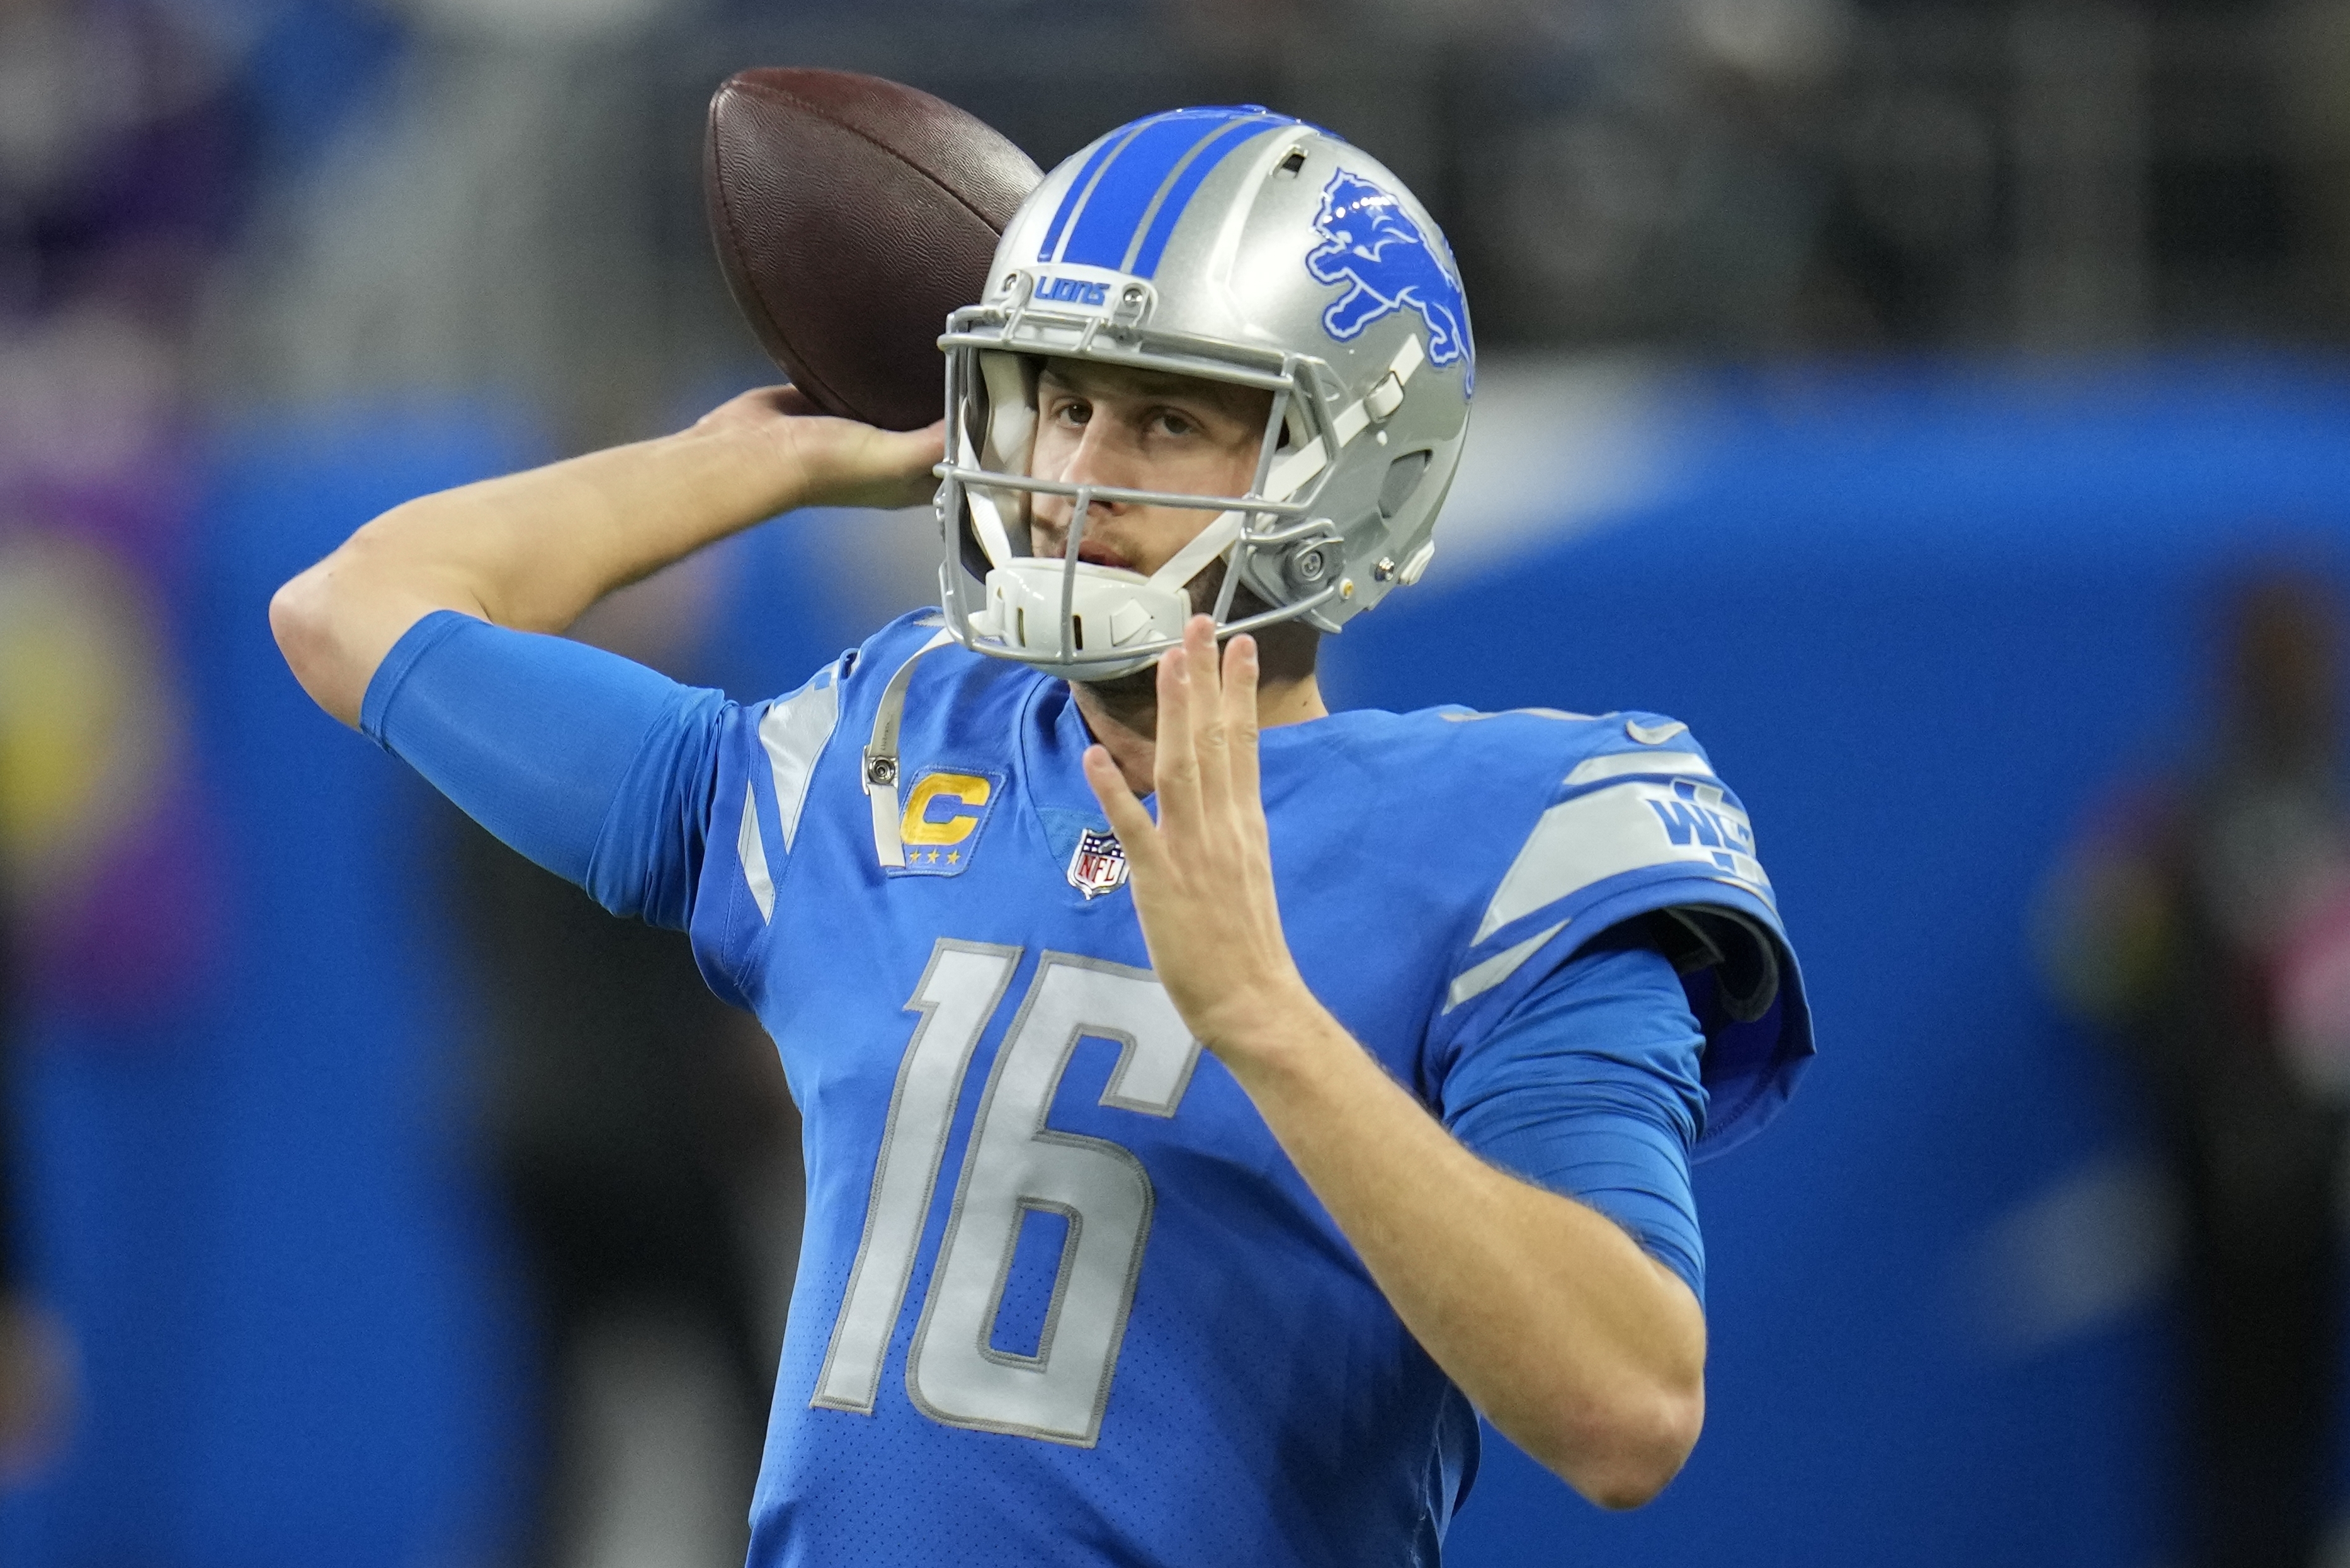 NFL on TV today (9/22/19): What time, channel is Detroit Lions vs